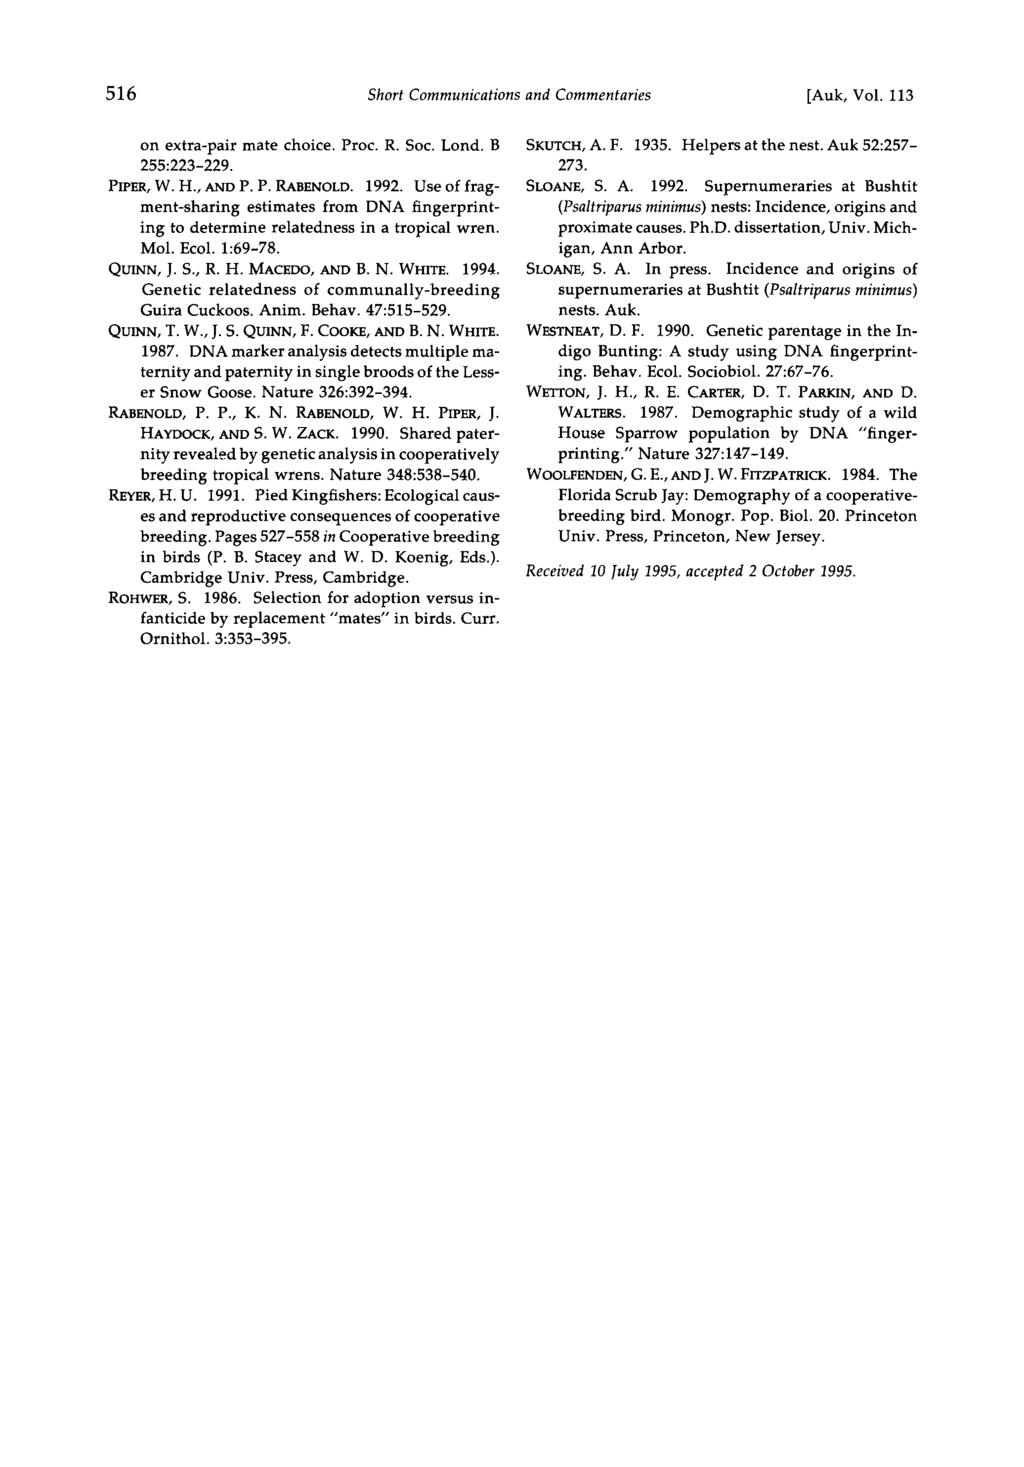 516 Short Communications and Commentaries [Auk, Vol. 113 on extra-pair mate choice. Proc. R. Soc. Lond. B 255:223-229. PIPER, W. I-I., AND P. P. RABENOLD. 1992.